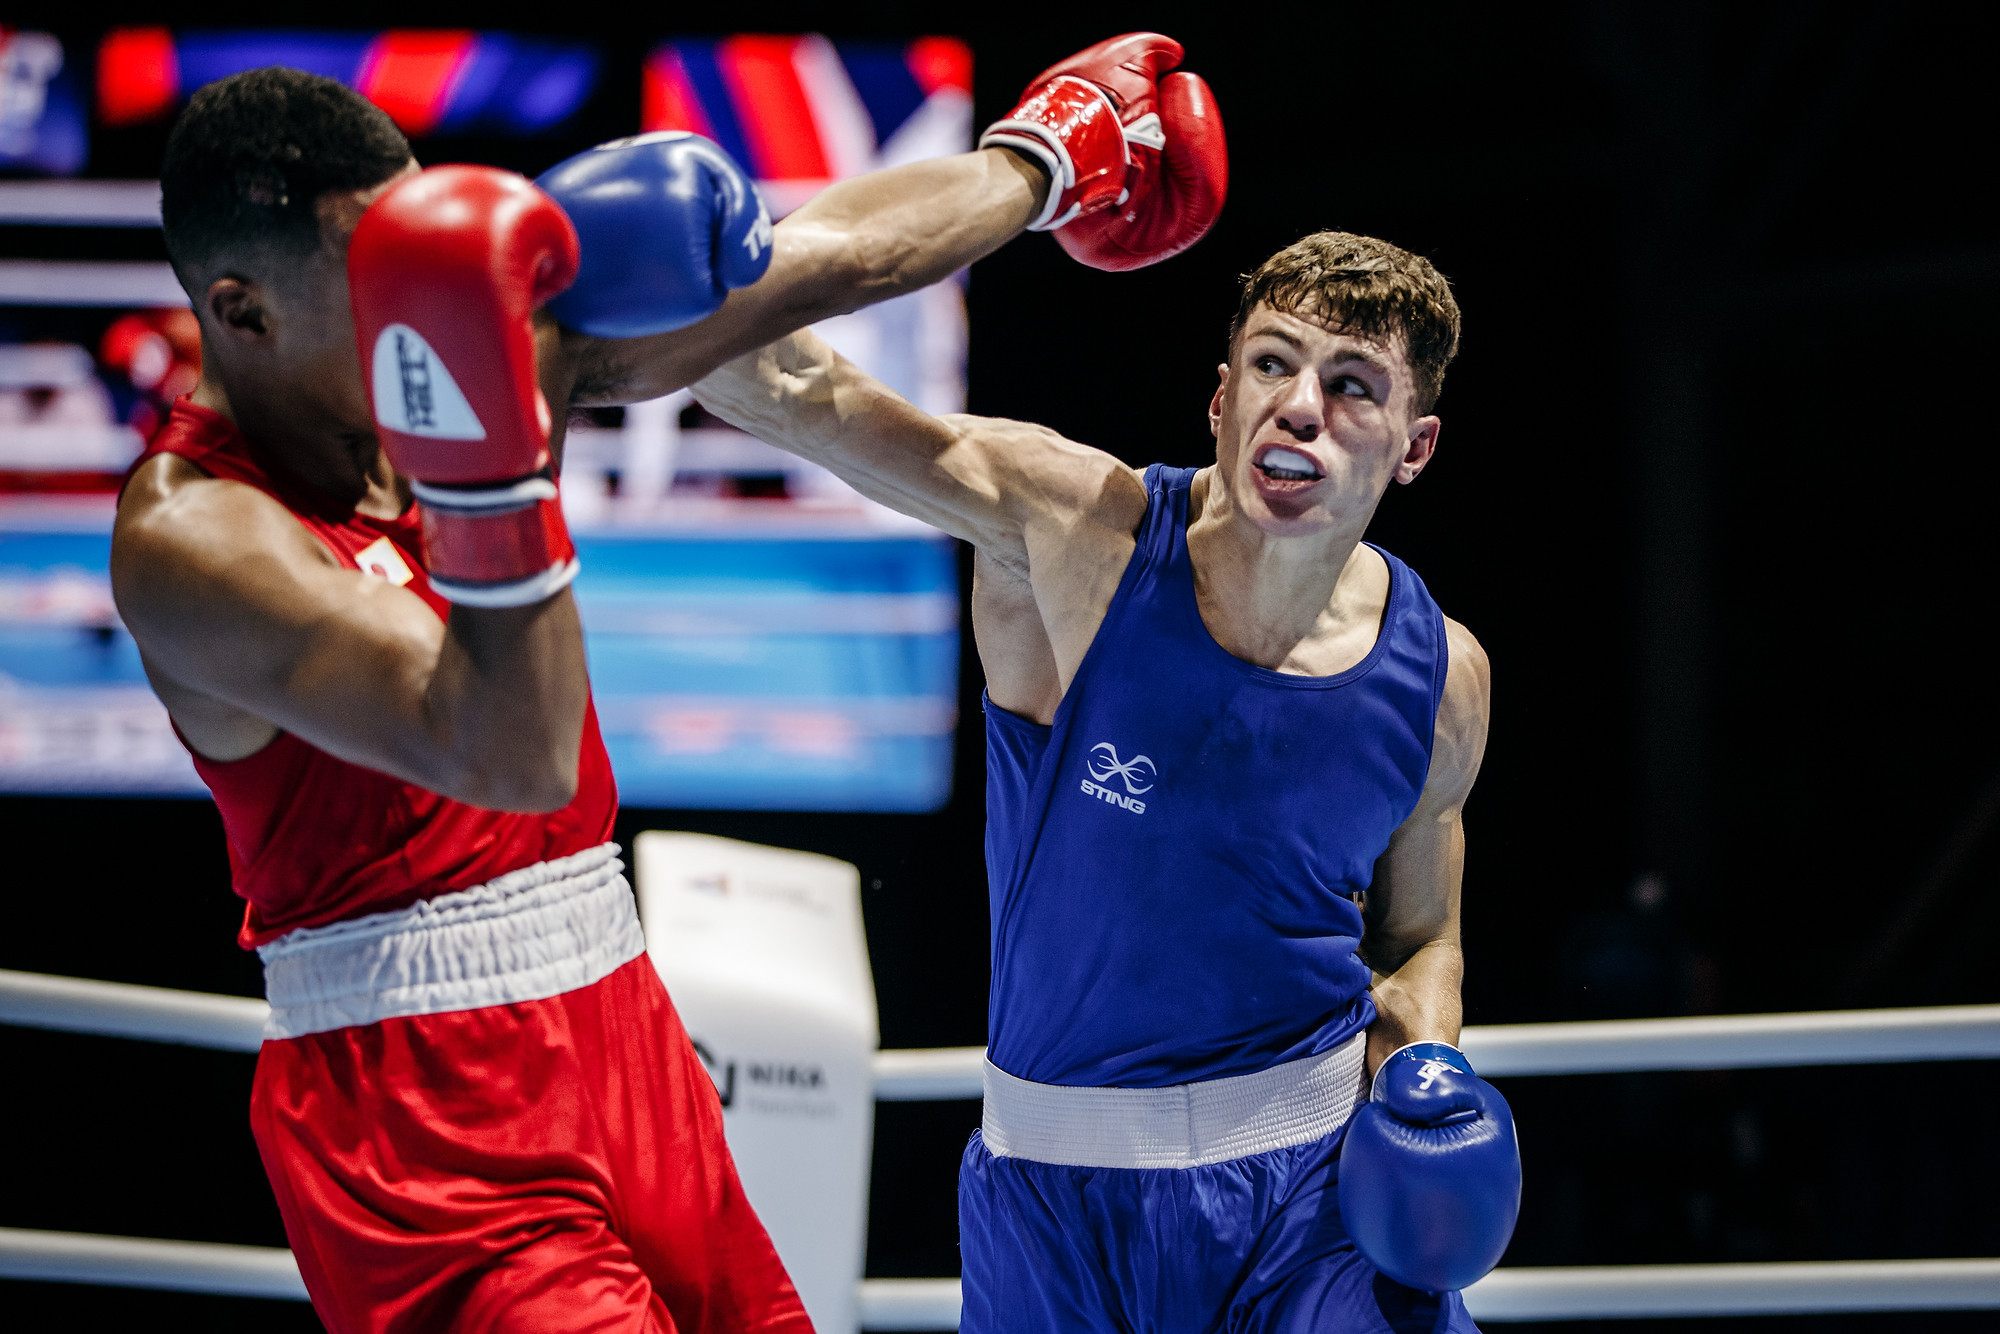 England's European and Commonwealth champion Pat McCormack edged past Sewonrets Okazawa of Japan 3-2 to reach the welterweight semi-final ©Yekaterinburg 2019